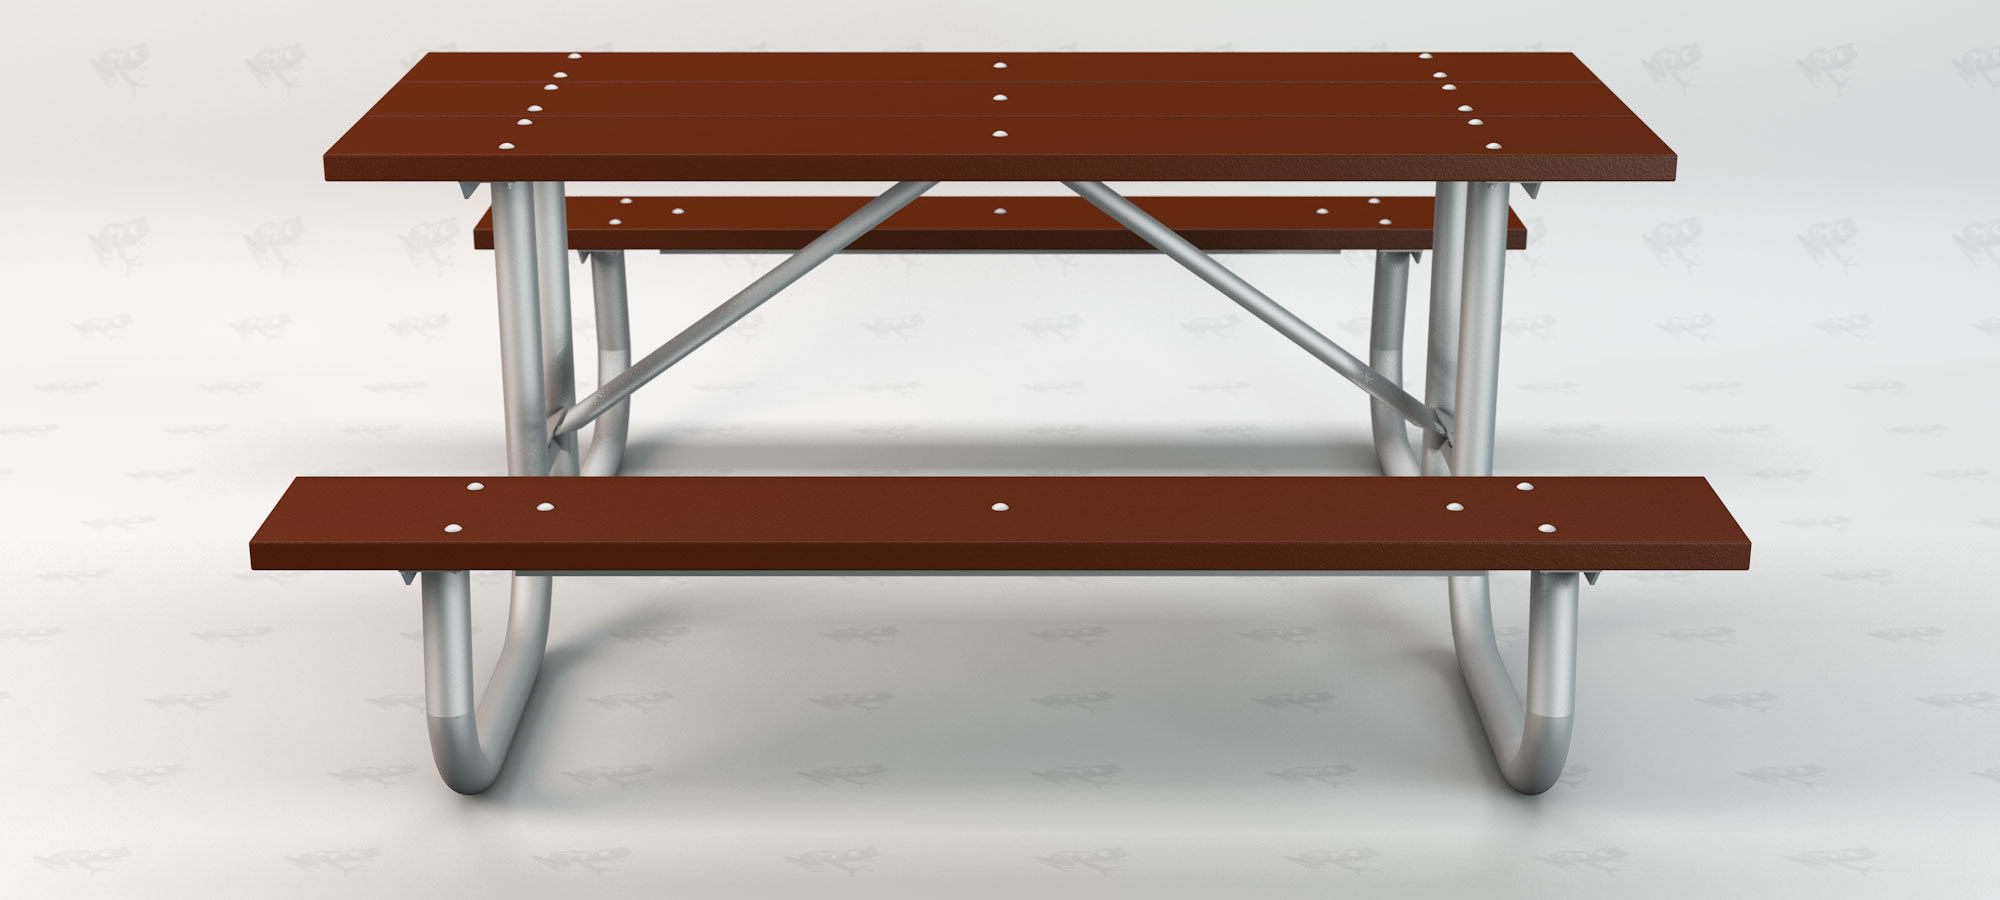 Galvanized Frame Table Front